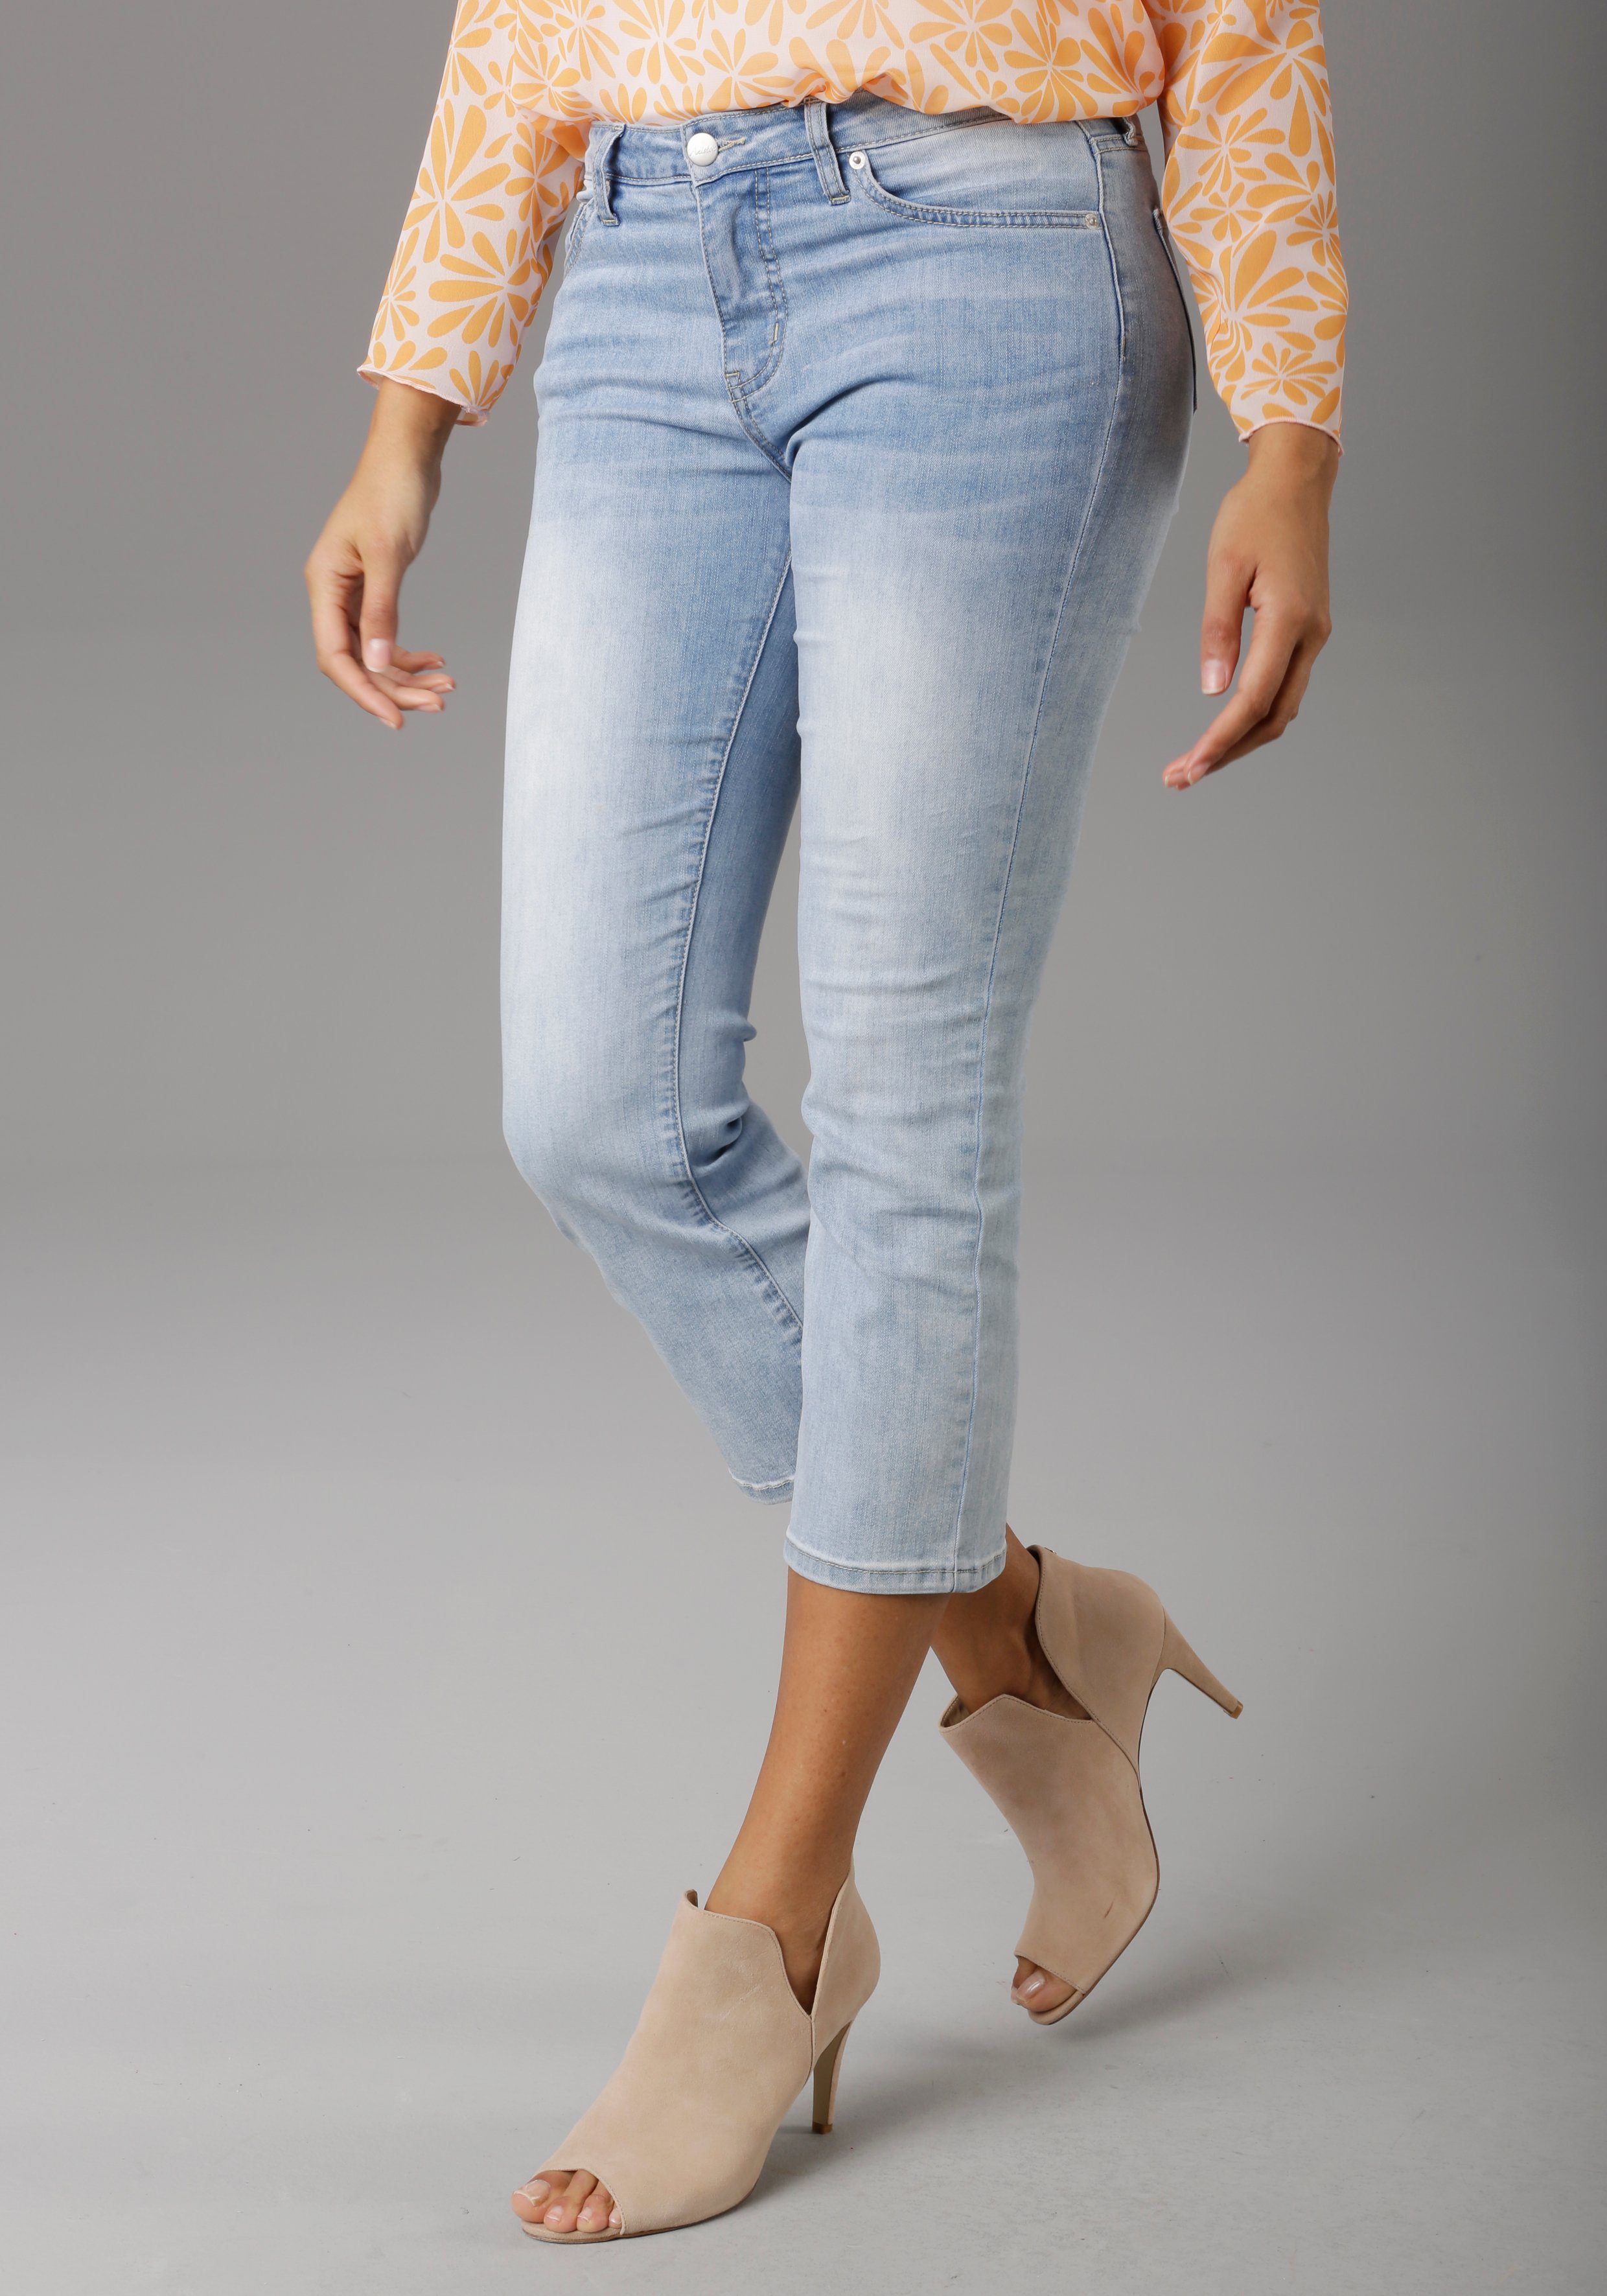 Aniston SELECTED Straight-Jeans in cropped verkürzter light-blue-washed Länge